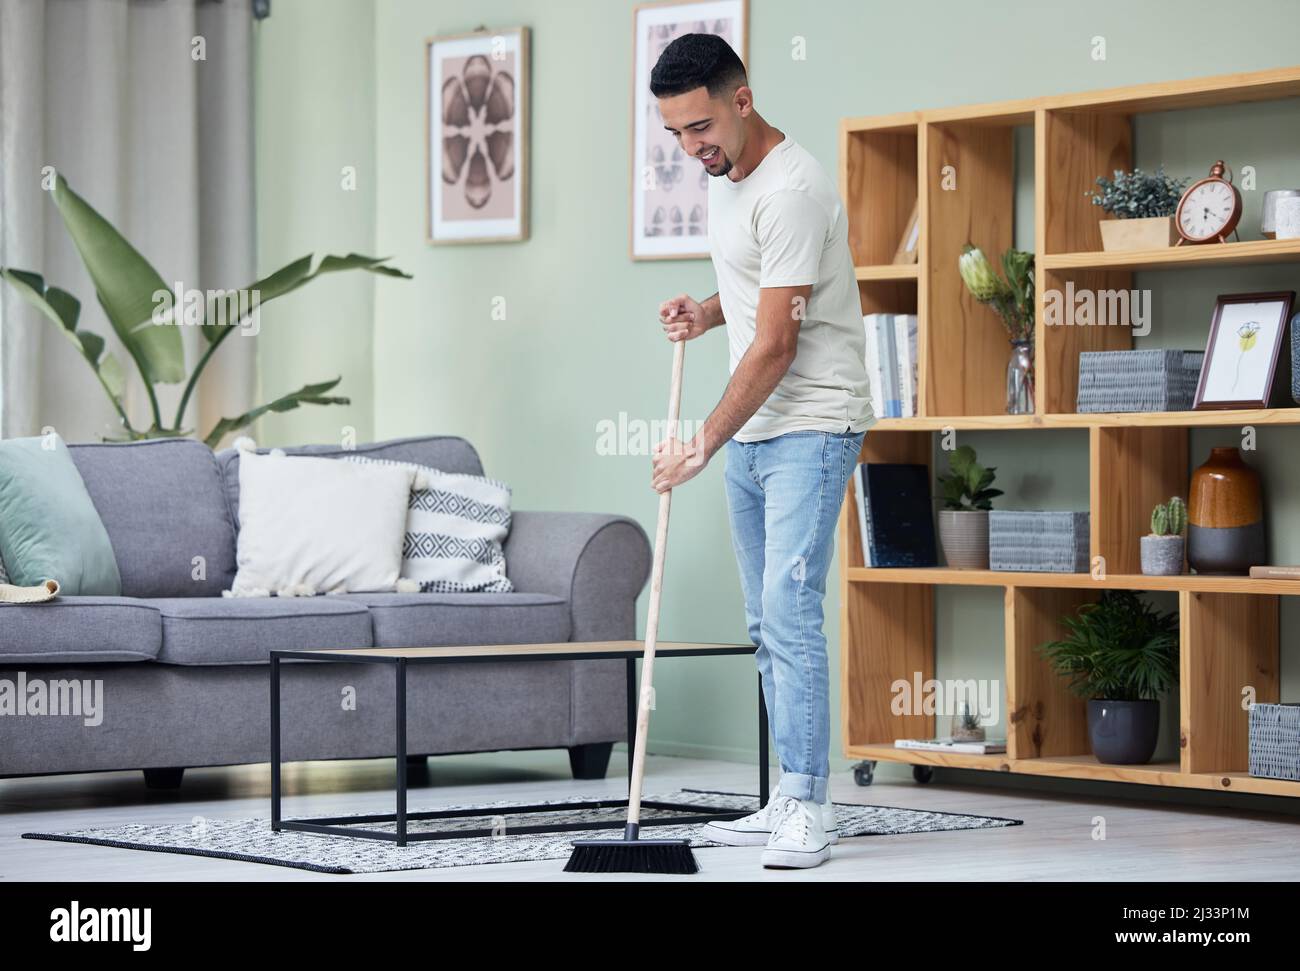 Dust doesnt stand a chance in this house. Shot of a young man sweeping the floor at home. Stock Photo